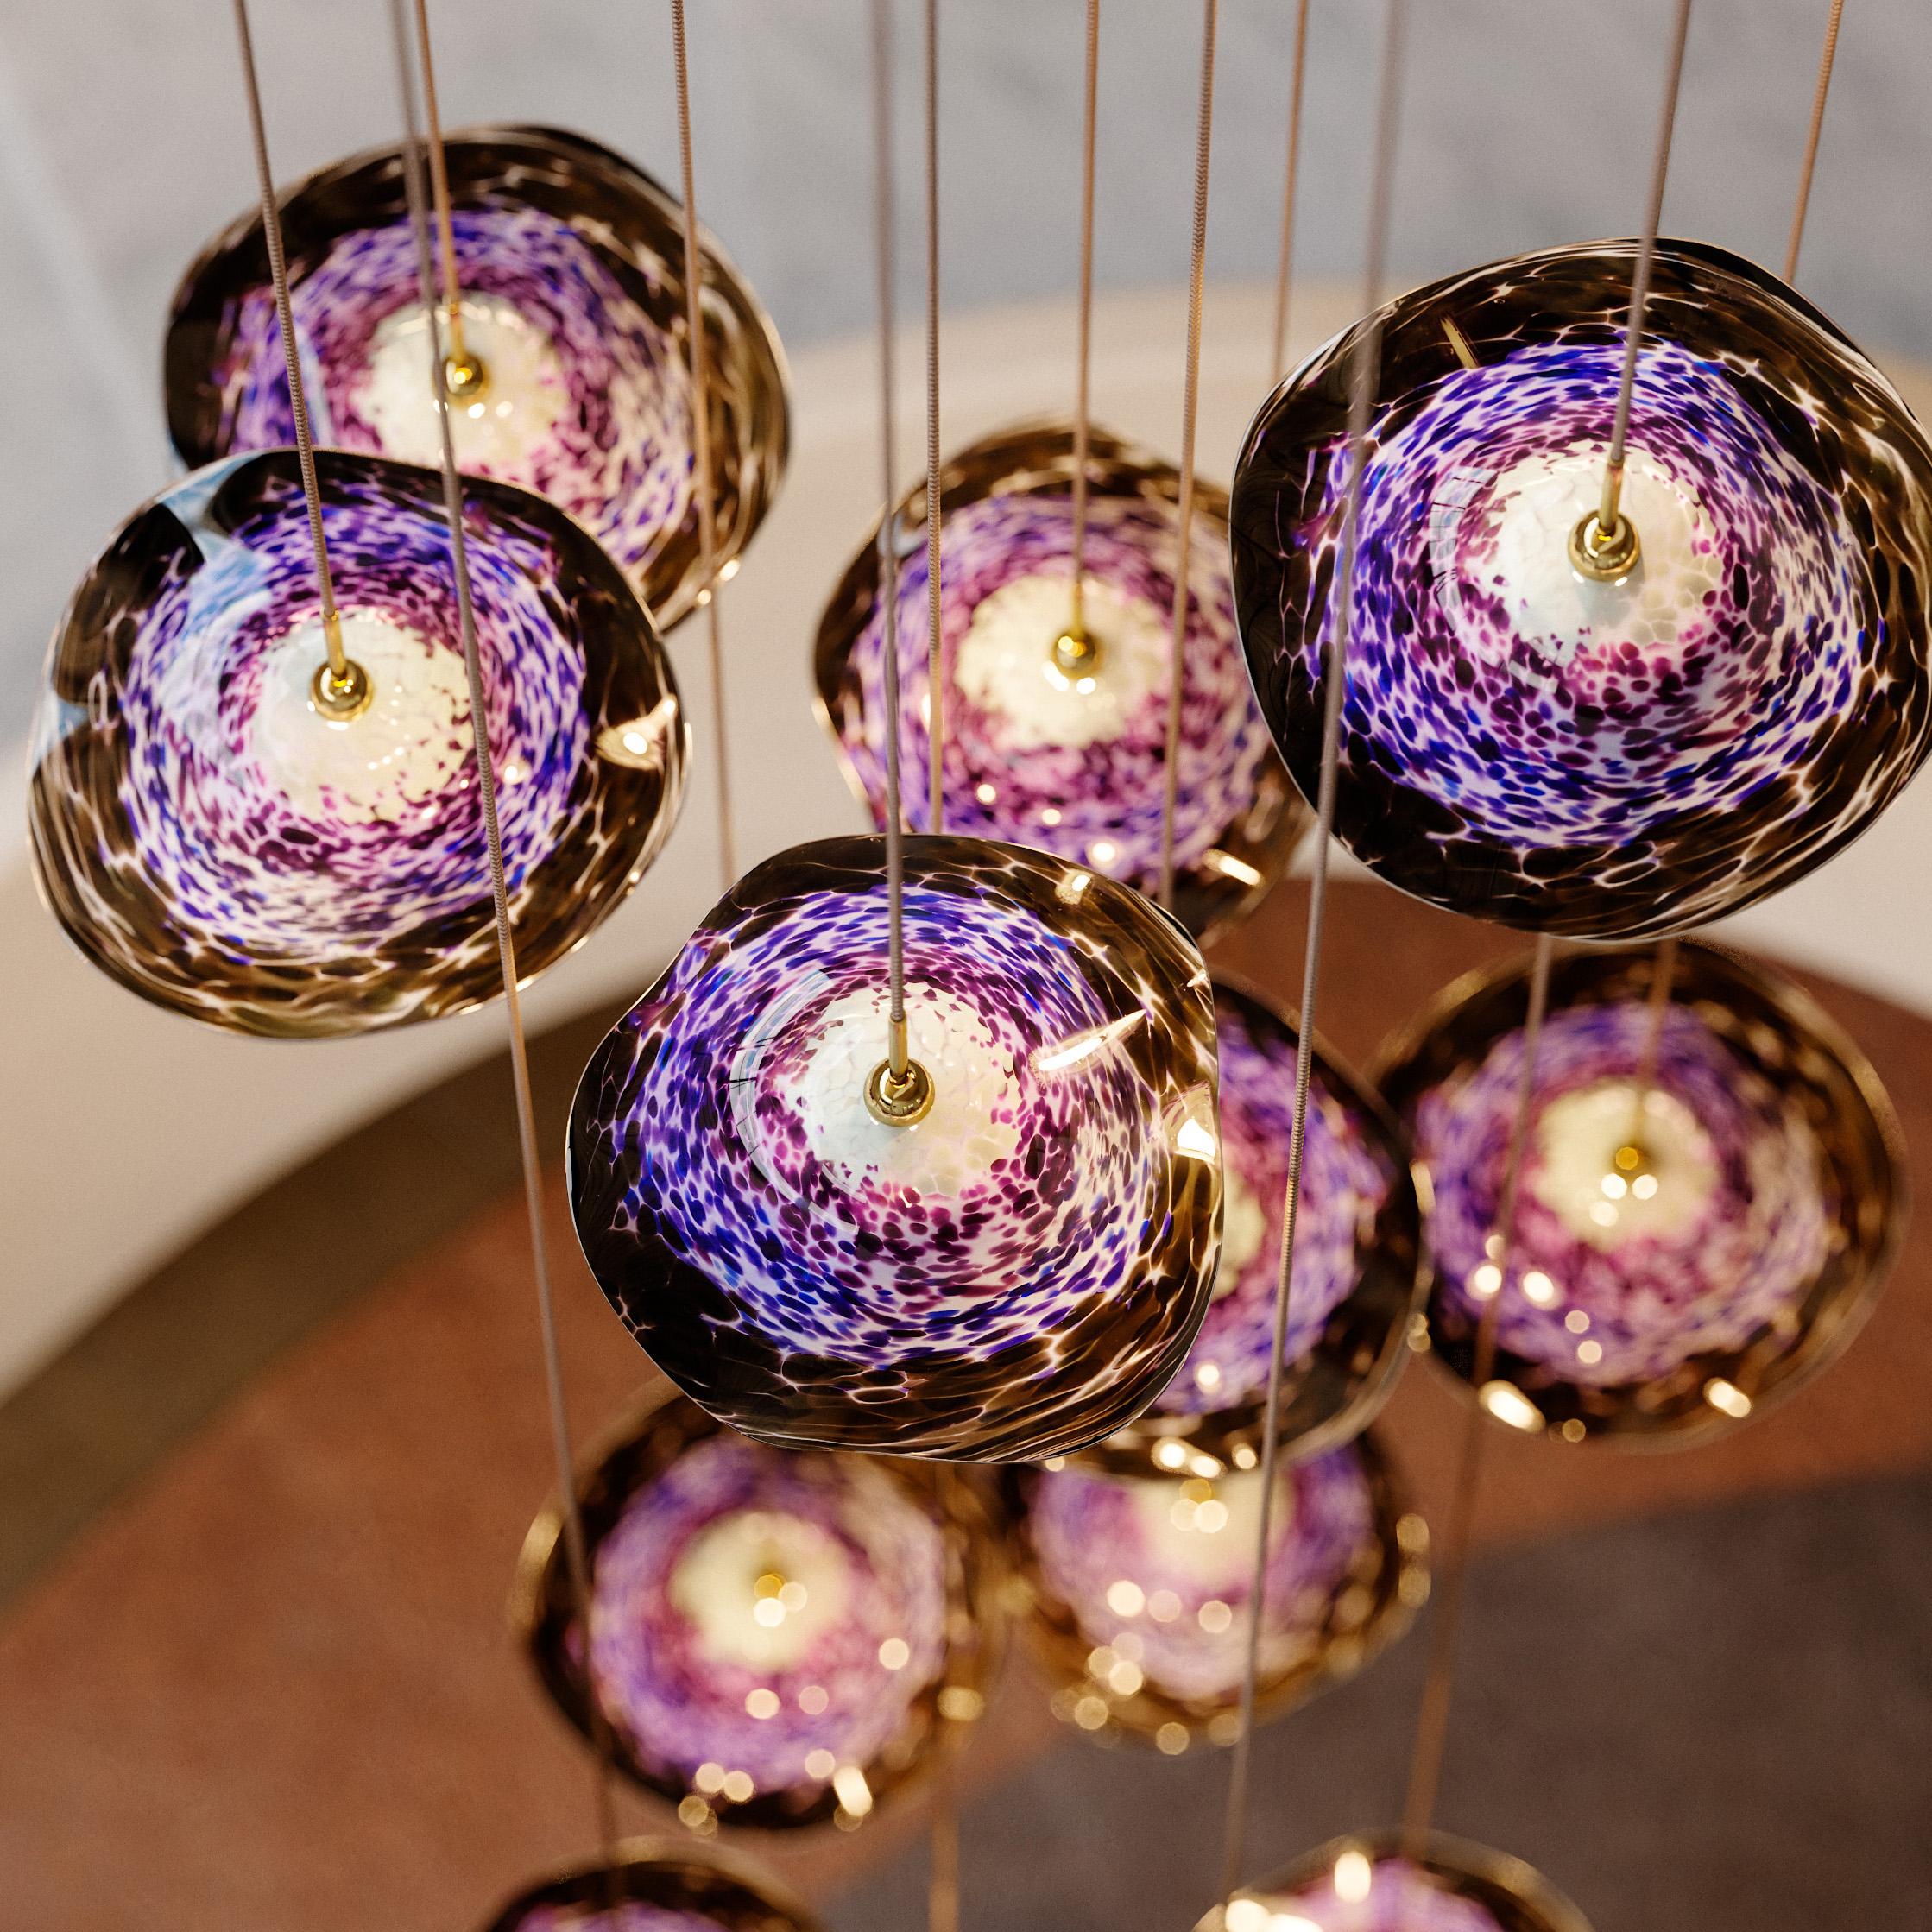 Feature Suspended Violet Pendant Handspun Light Fixture Organic Natural Form Glass Gold Luxury Nulty Bespoke